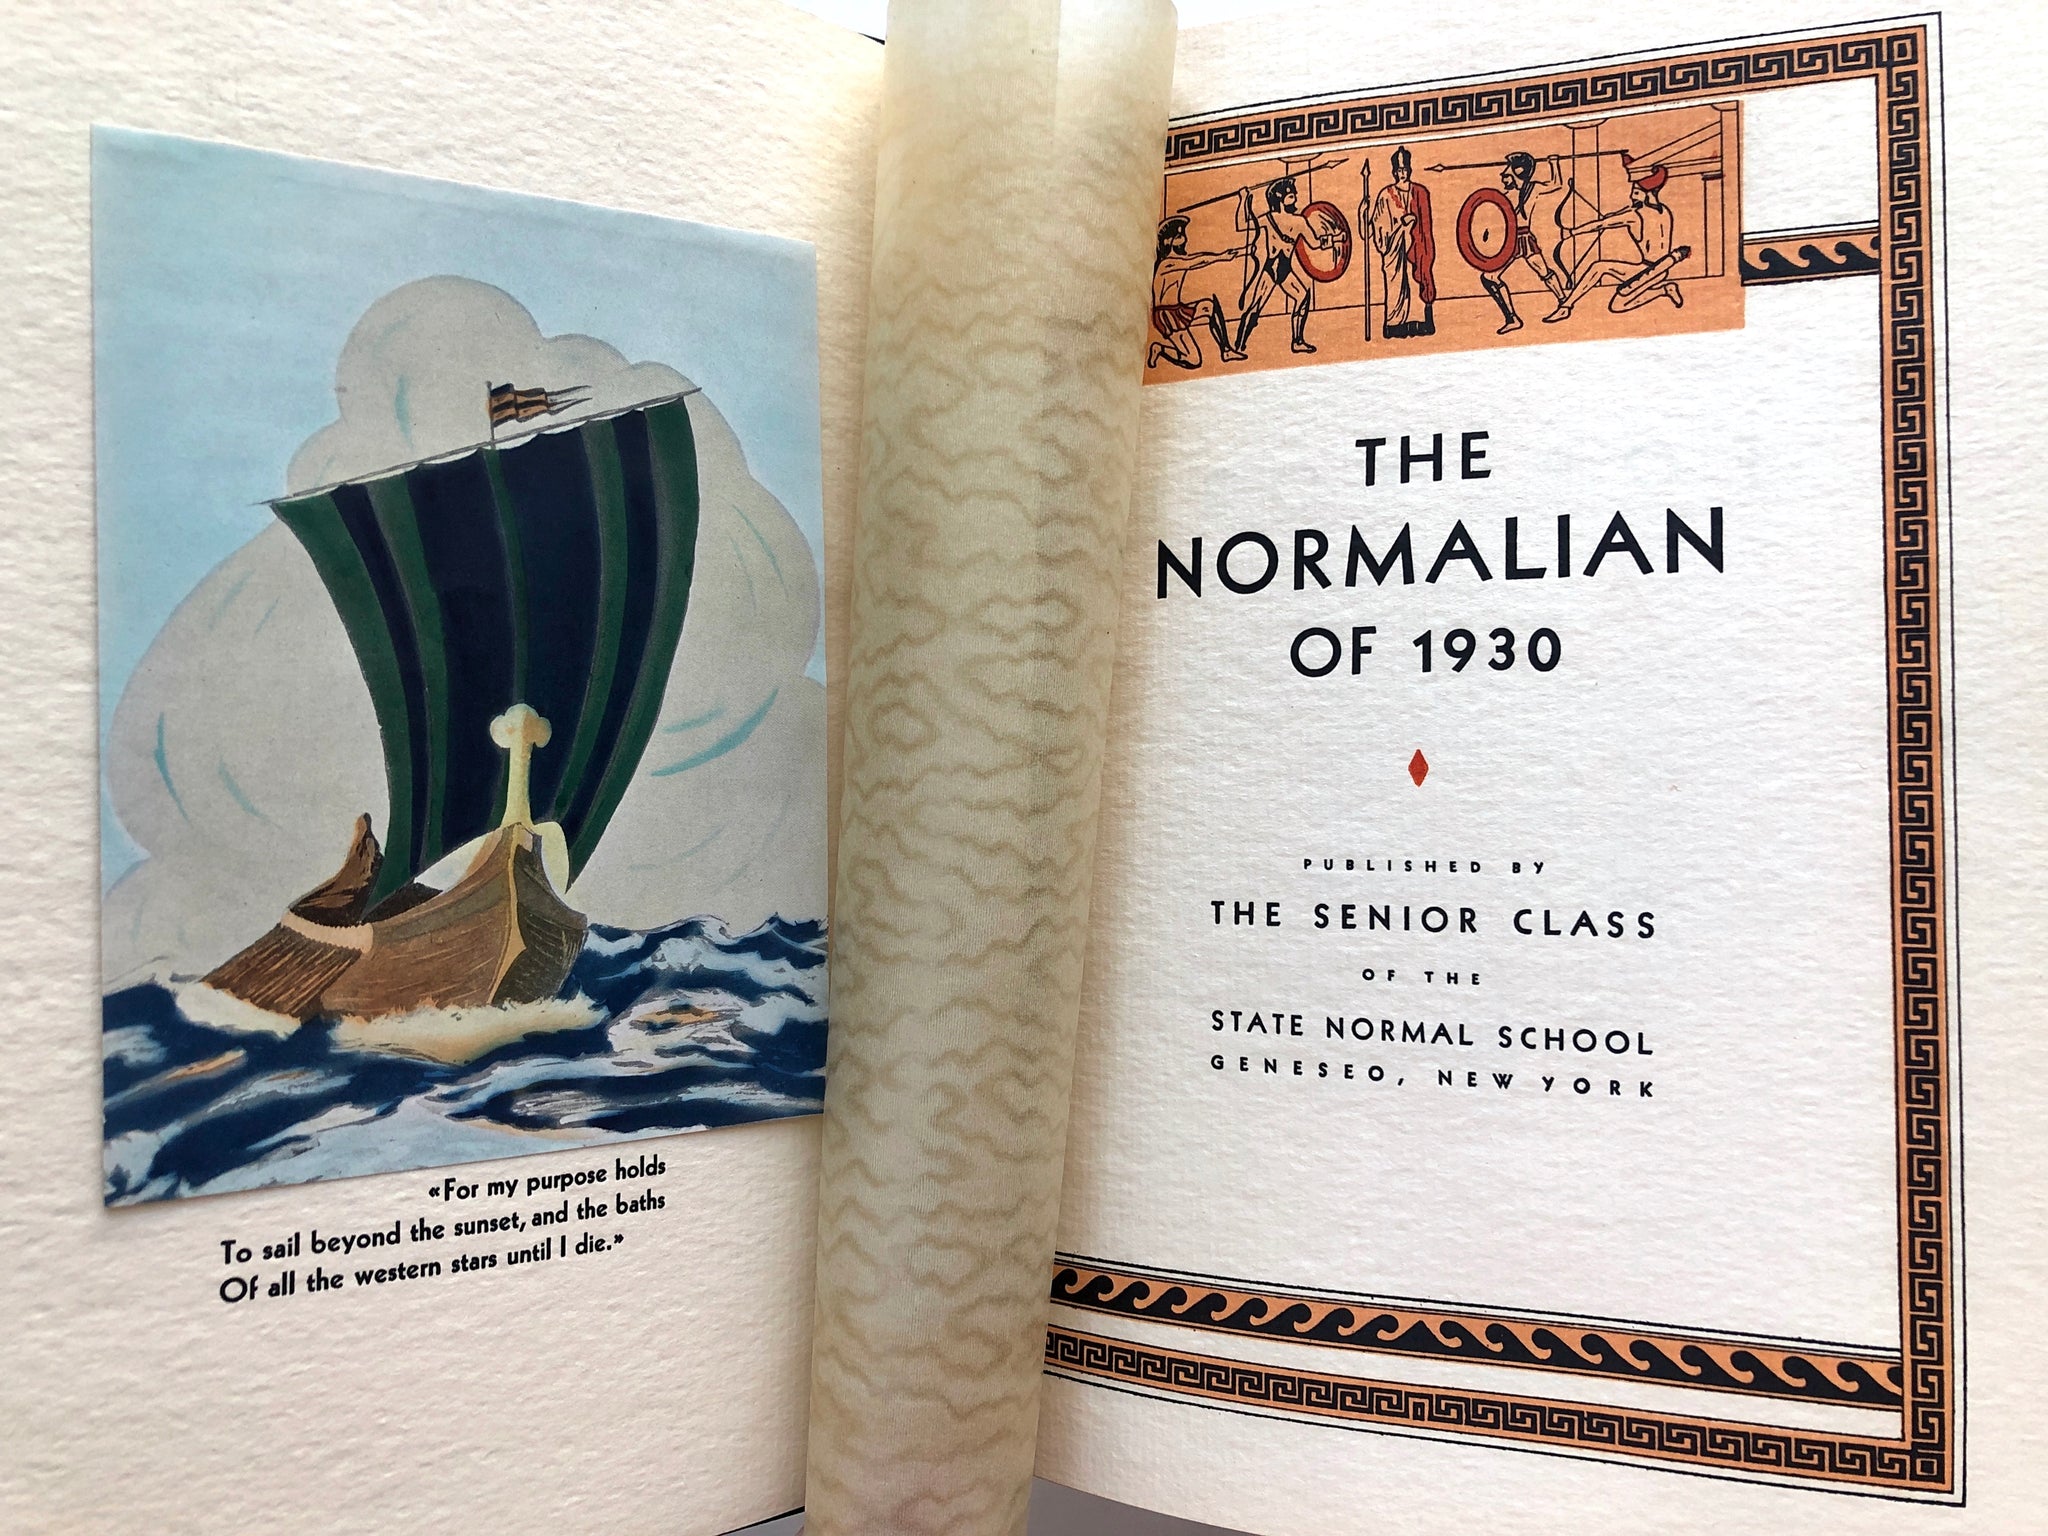 The Normalian of 1930 - Yearbook of the State Normal School at Geneseo, NY